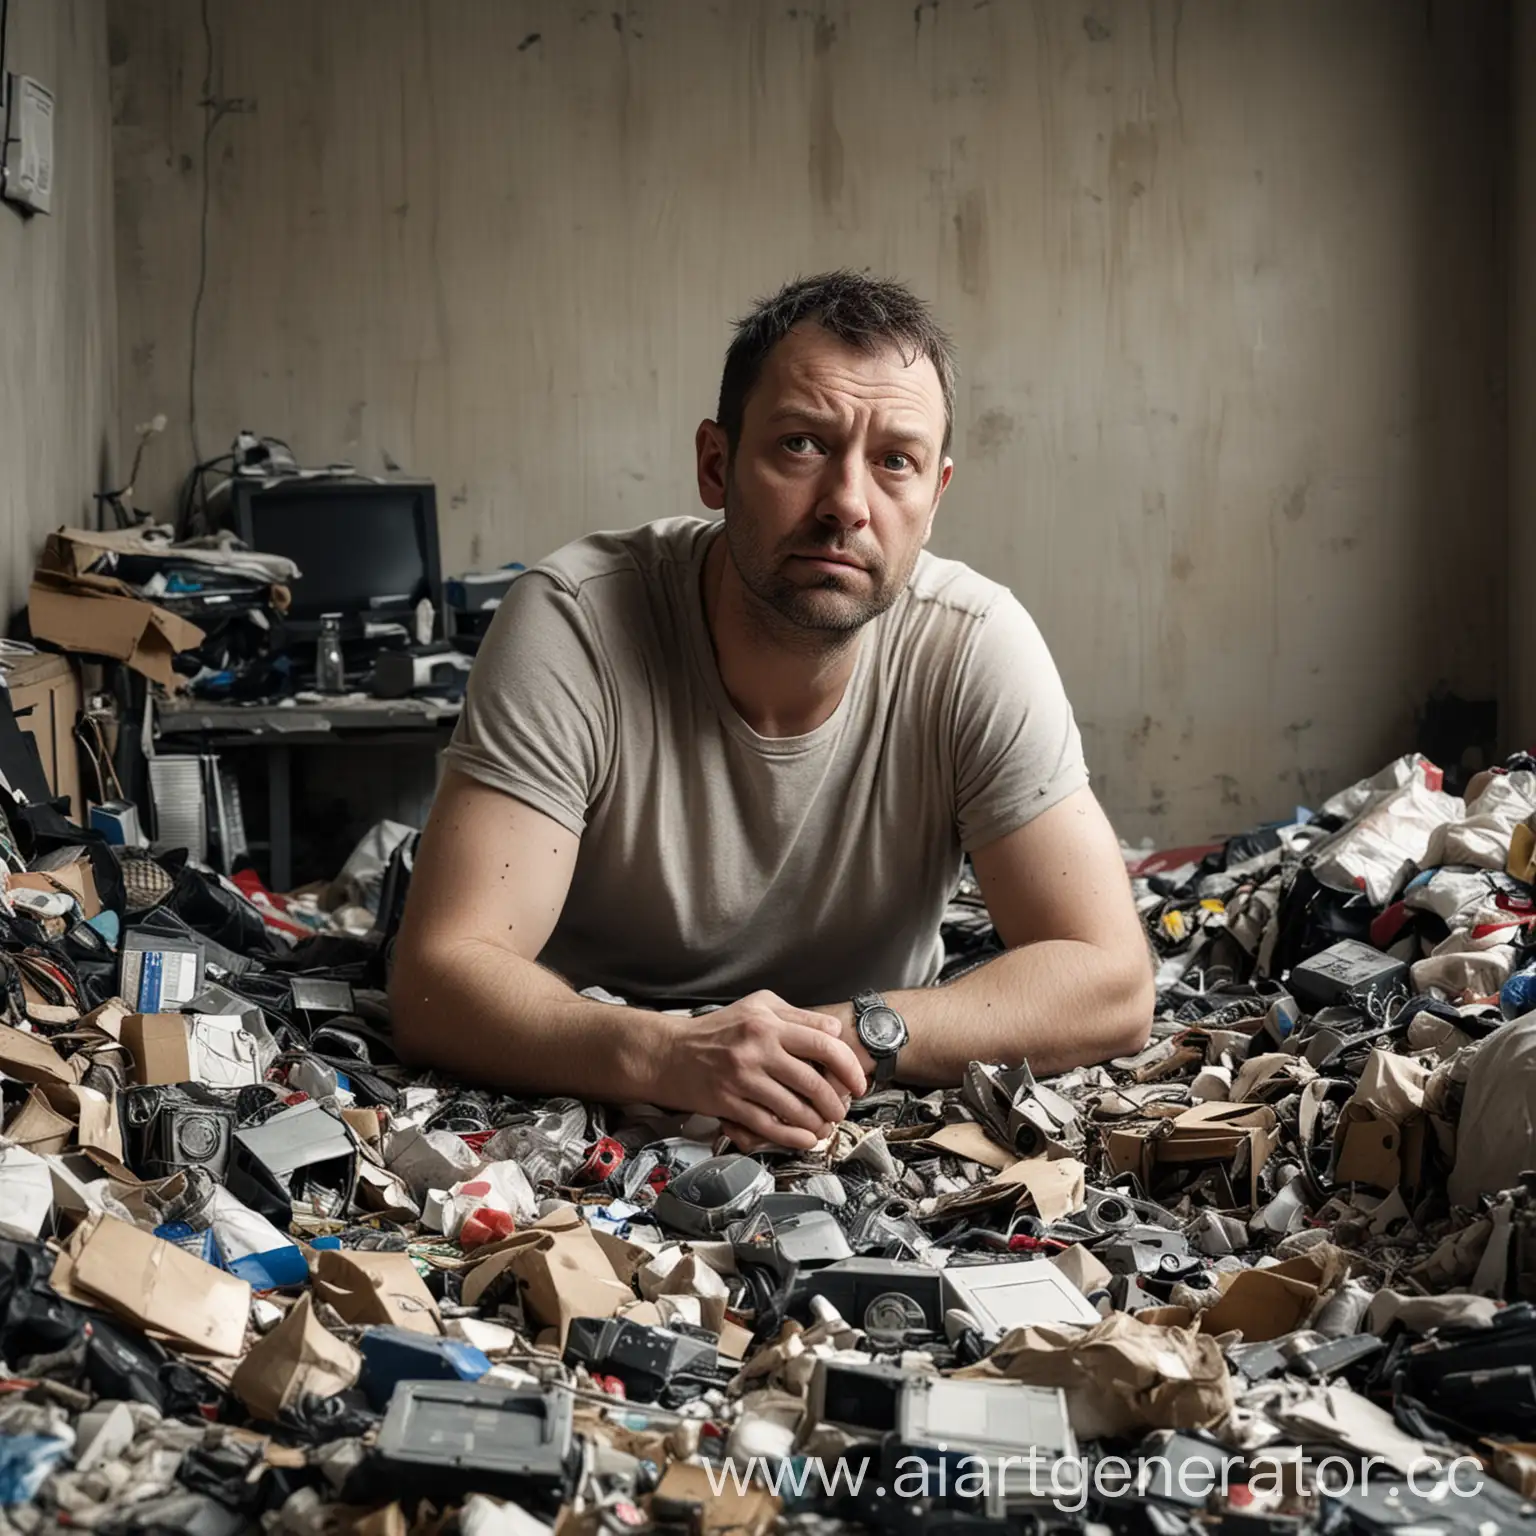 ugly 38 year old man does not believe in the superiority of AI very detailed in a dirty room with a lot of rubbish